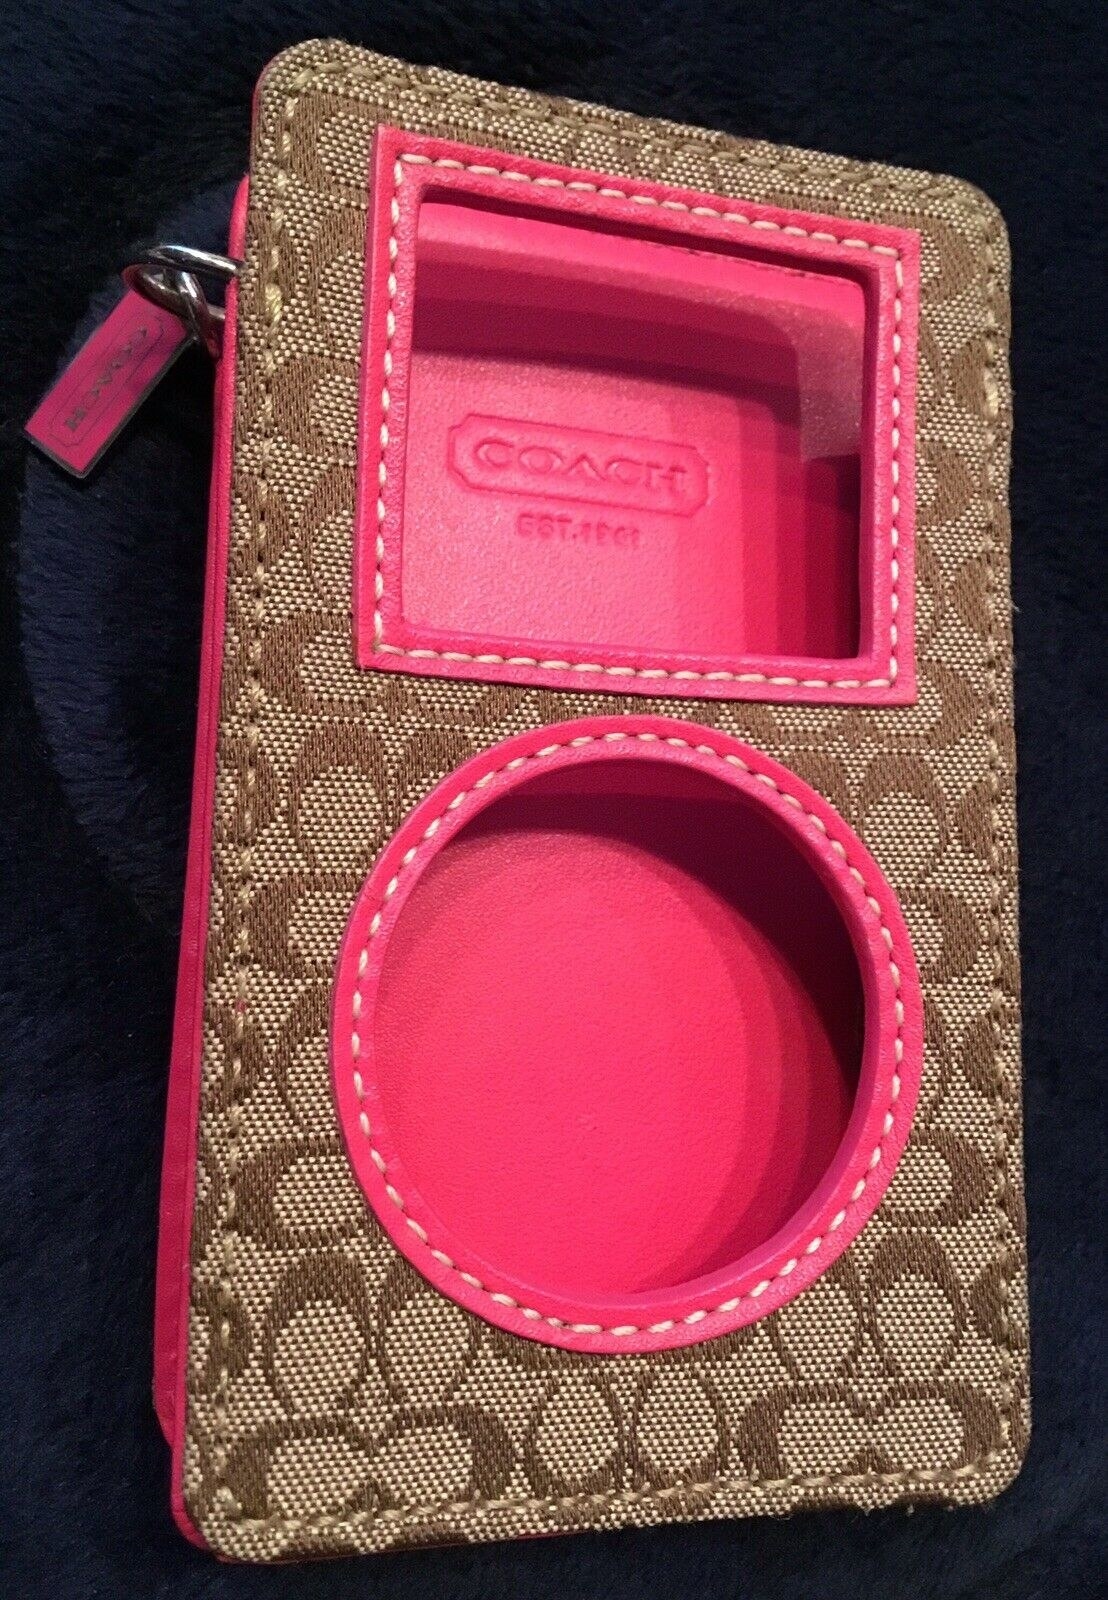 A Coach logo iPod cover with a hot pink leather interior 